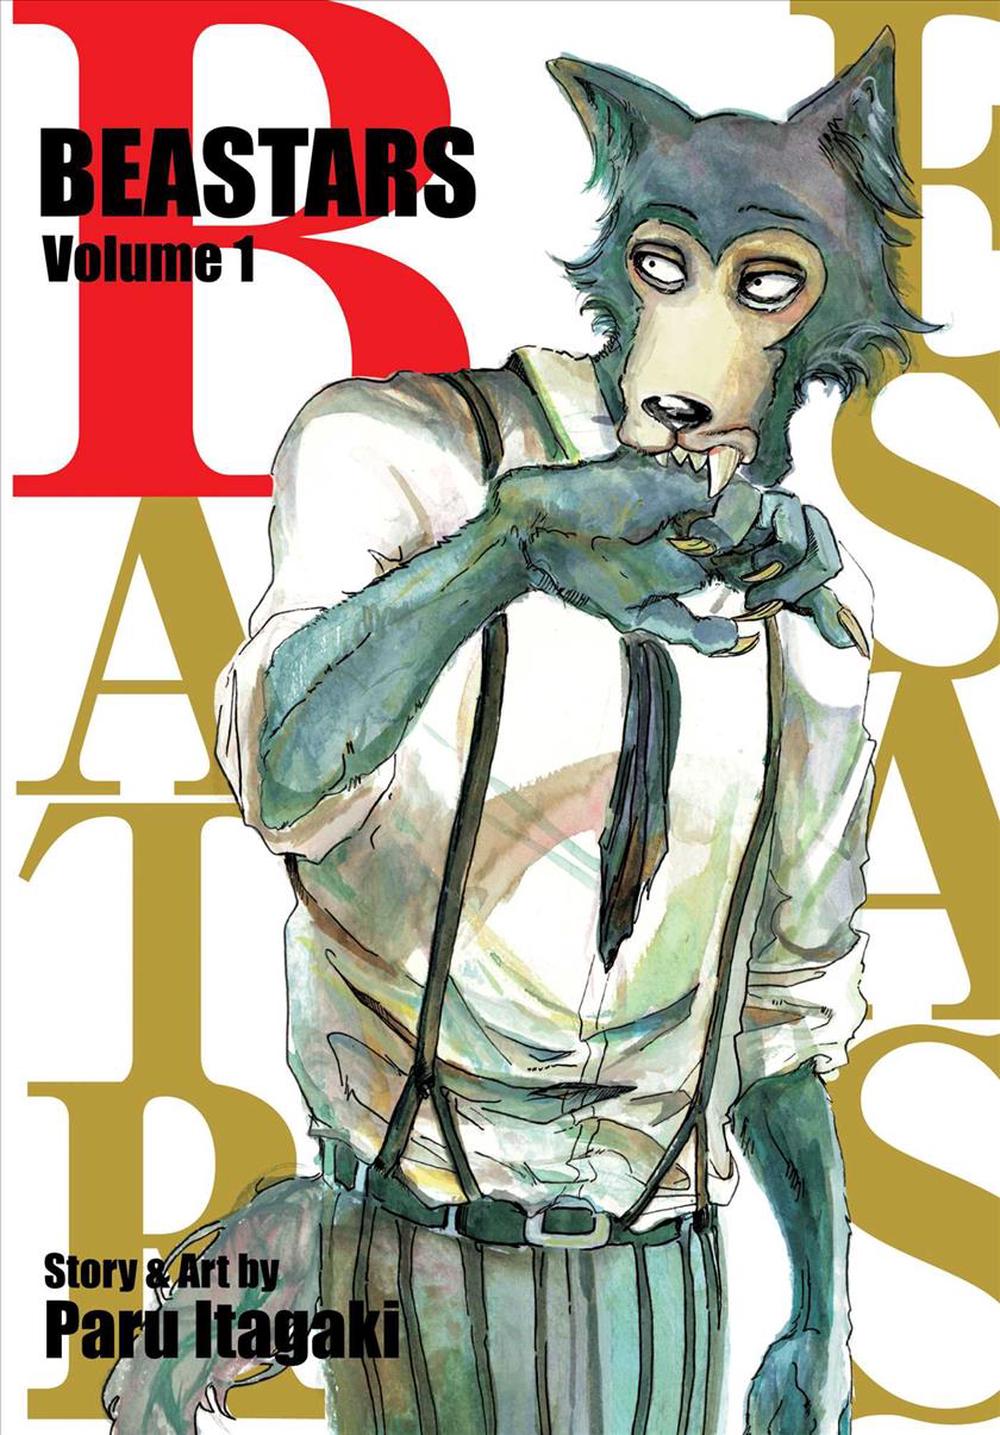 Beastars Vol 1 By Paru Itagaki Paperback Buy Online At The Nile